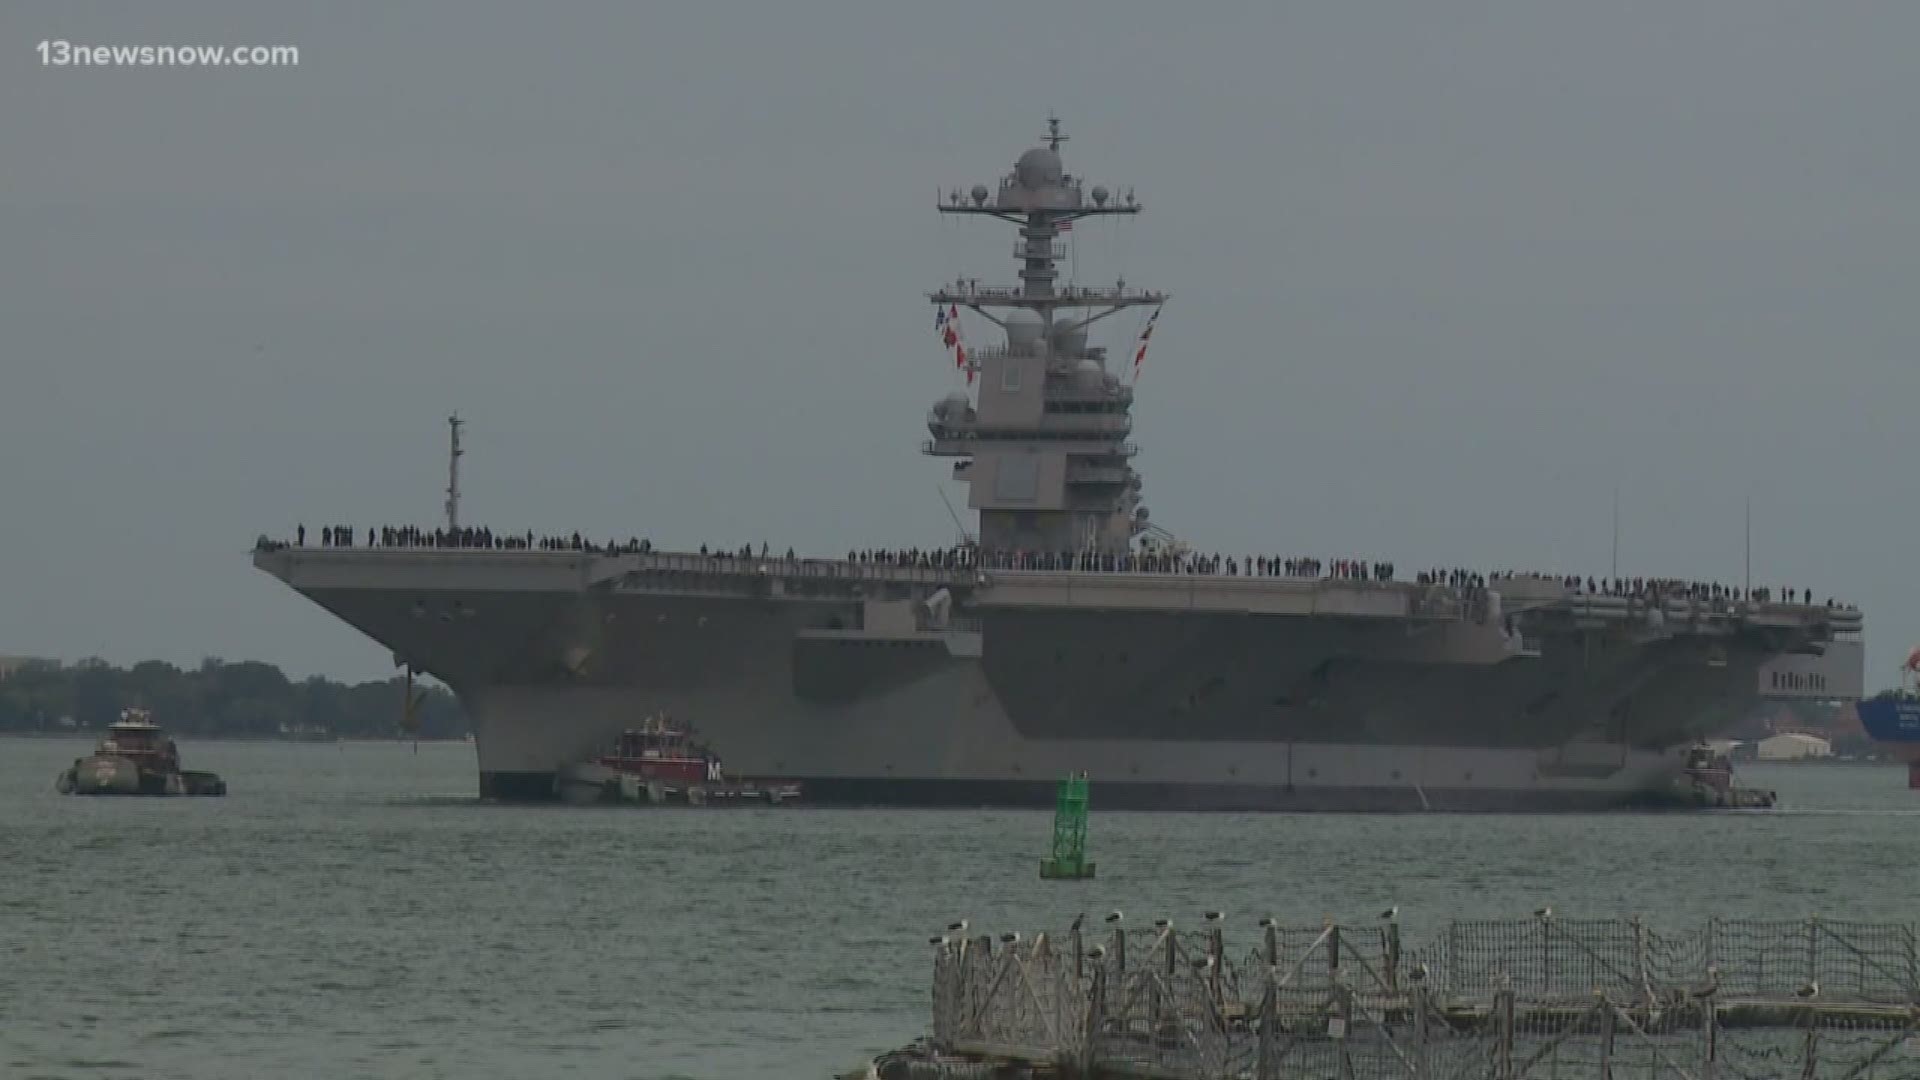 The acting secretary of the Navy told the Senate Armed Services Committee that the Navy might not stick with the Ford design after work is complete on CVN-81.